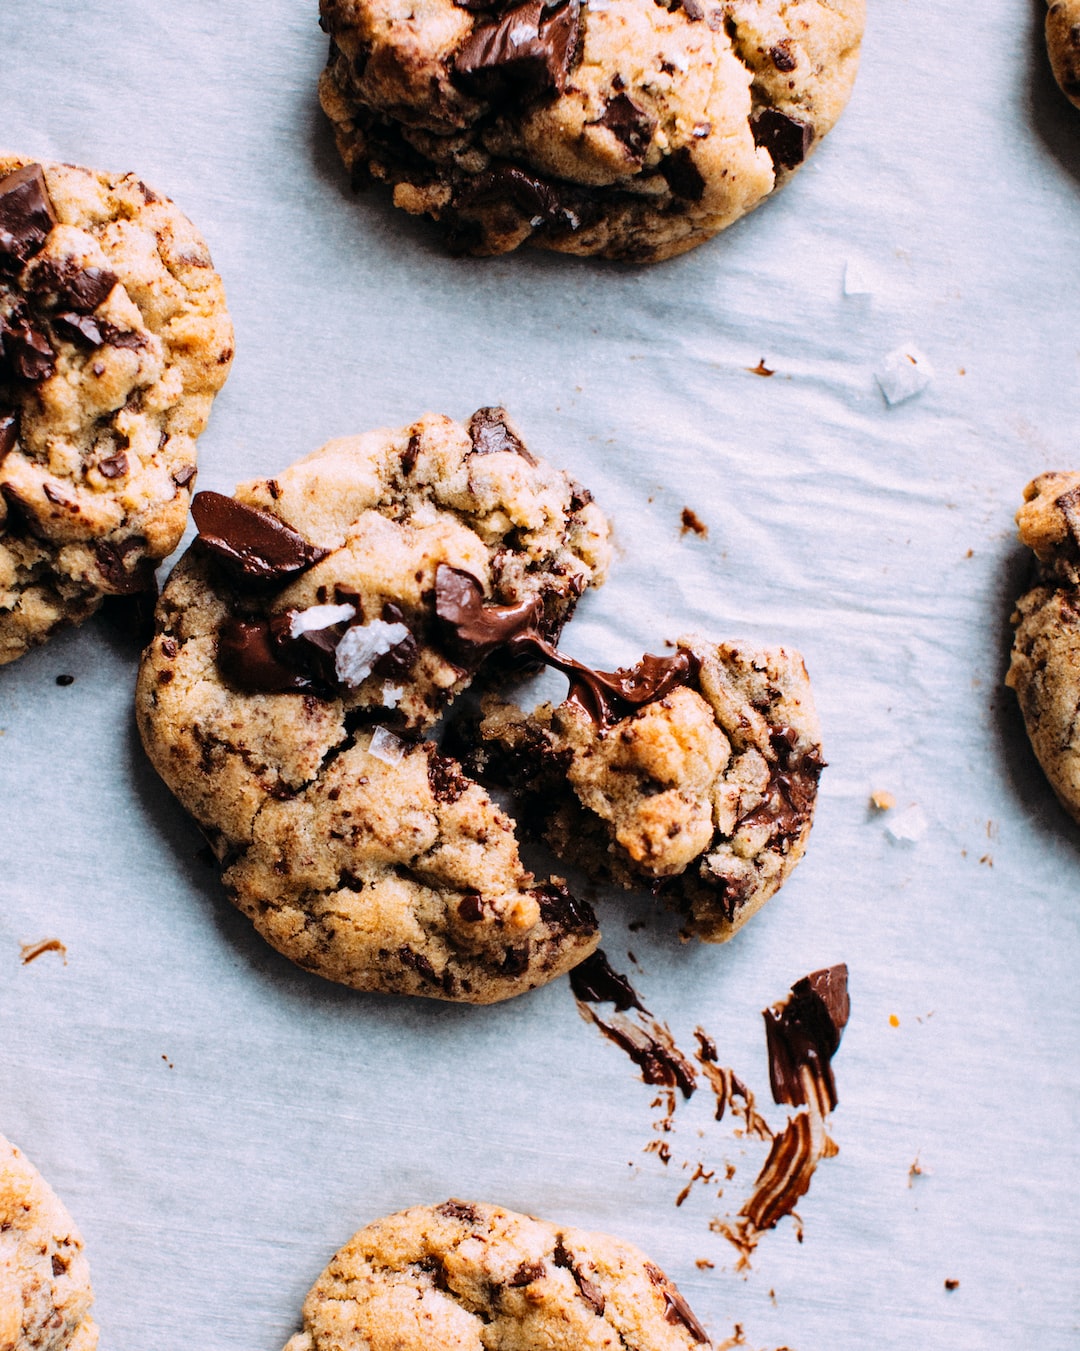 A Delicious Recipe for Homemade Chocolate Chip Cookies